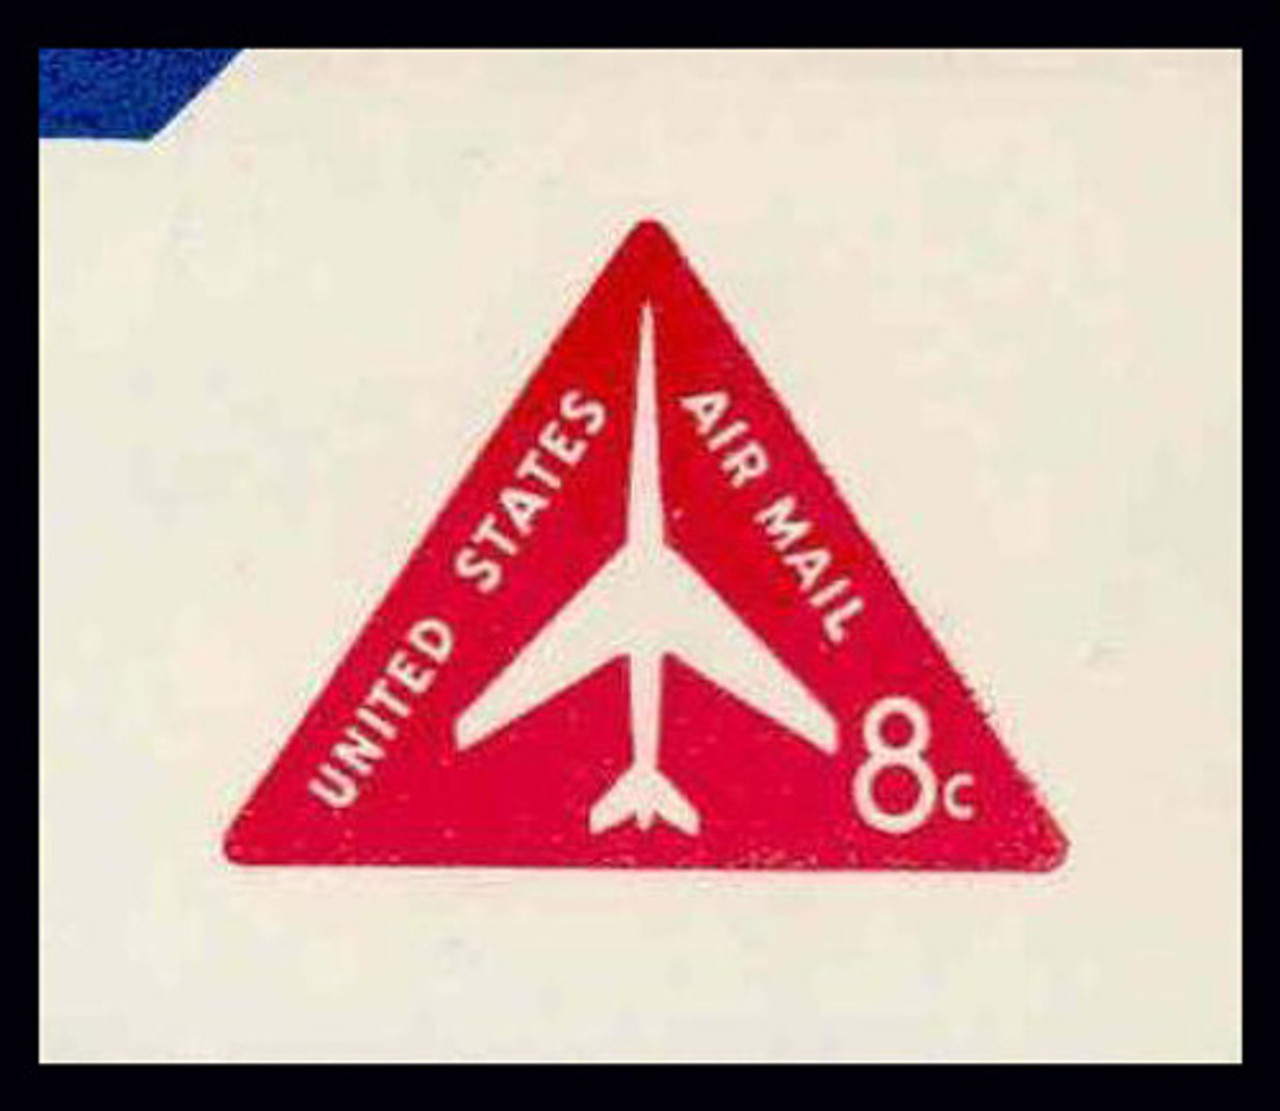 USA Scott # UC 37 1965 8c Jet Airliner, Red, Border 6 - Mint Cut Square (See Warranty)